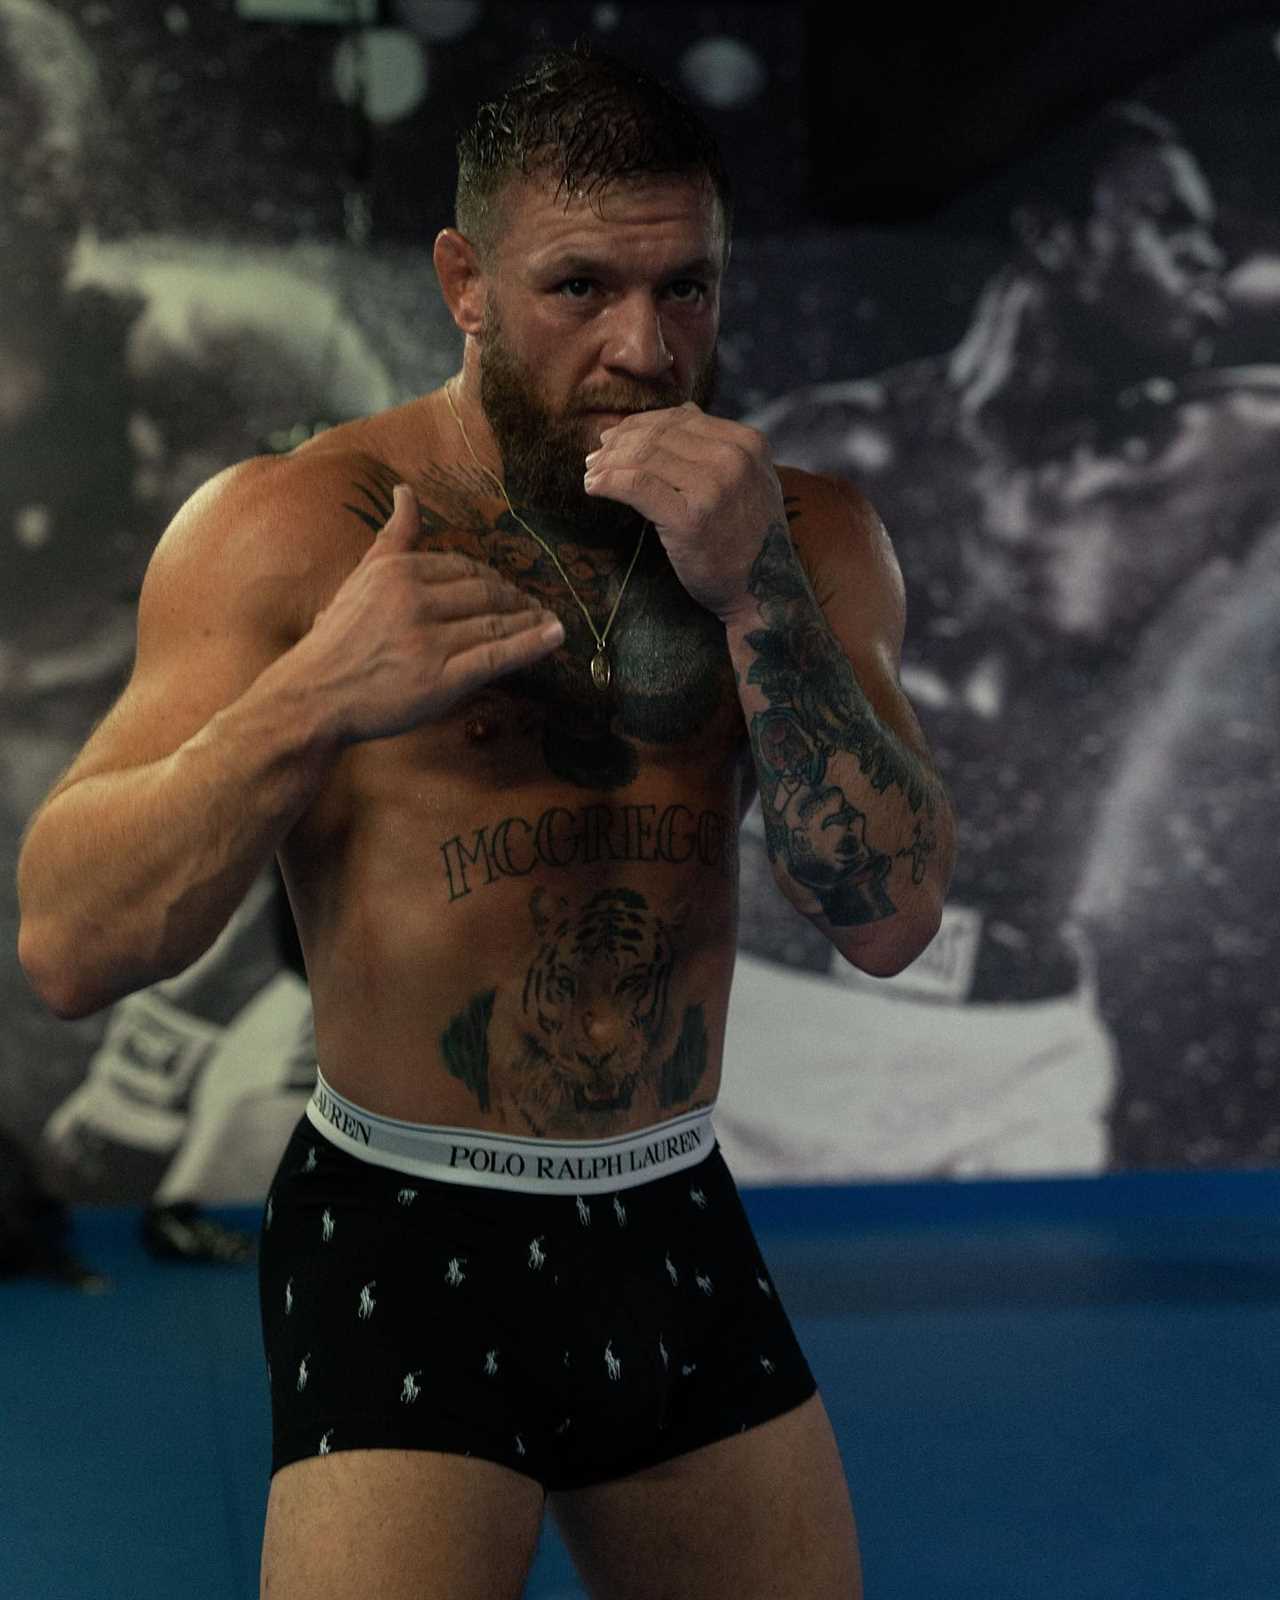 After being left with marks from UFC training, Conor McGregor was compared to the 140st GORILLA coach